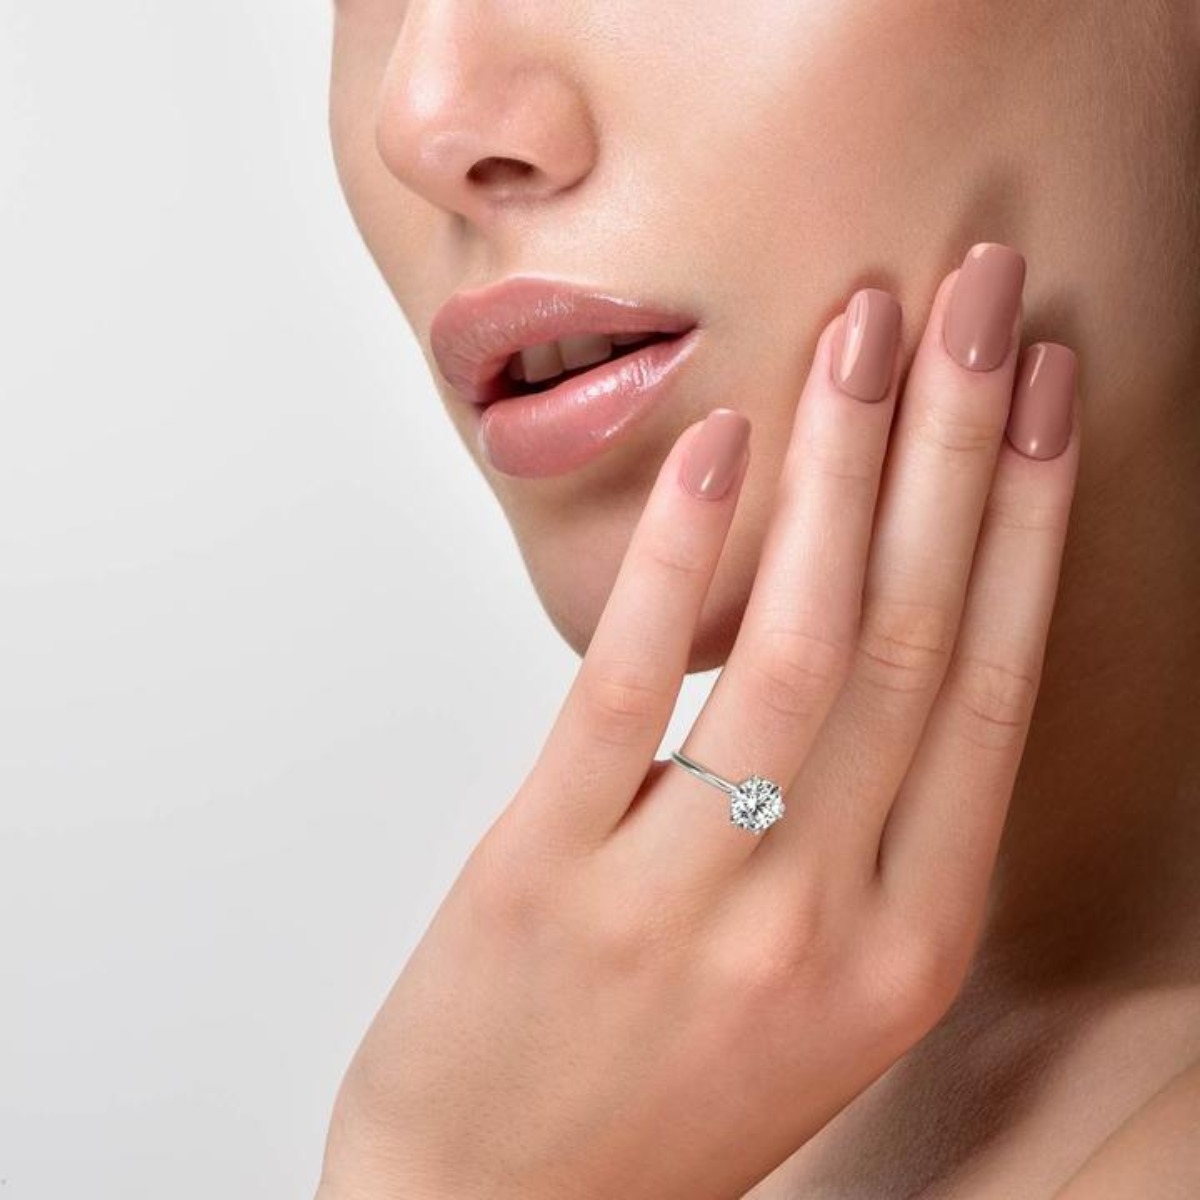 Your Ring Shopping Problems Solved with Stefano Naviâs Lab-grown Diamonds